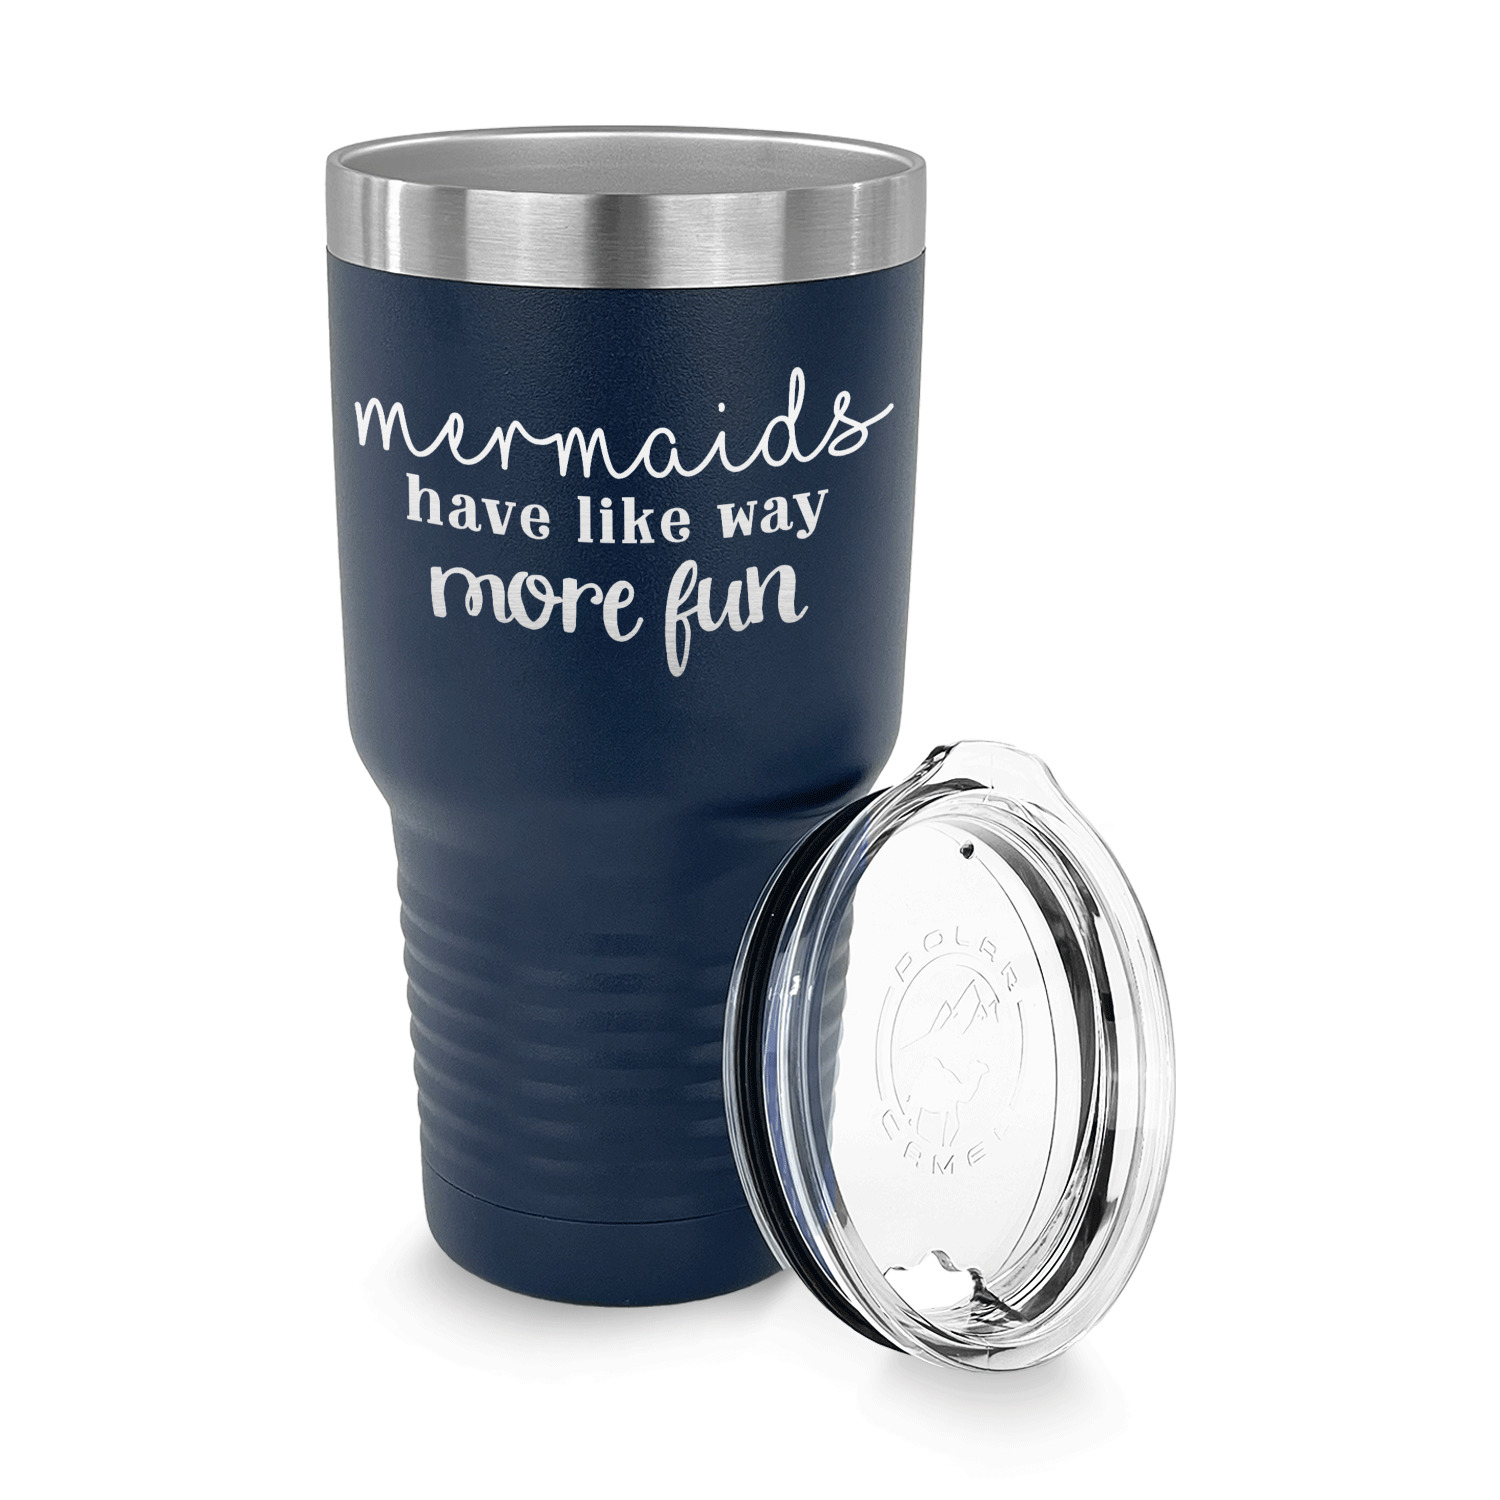 https://www.youcustomizeit.com/common/MAKE/435716/Mermaids-30-oz-Stainless-Steel-Ringneck-Tumblers-Navy-LID-OFF.jpg?lm=1688680332